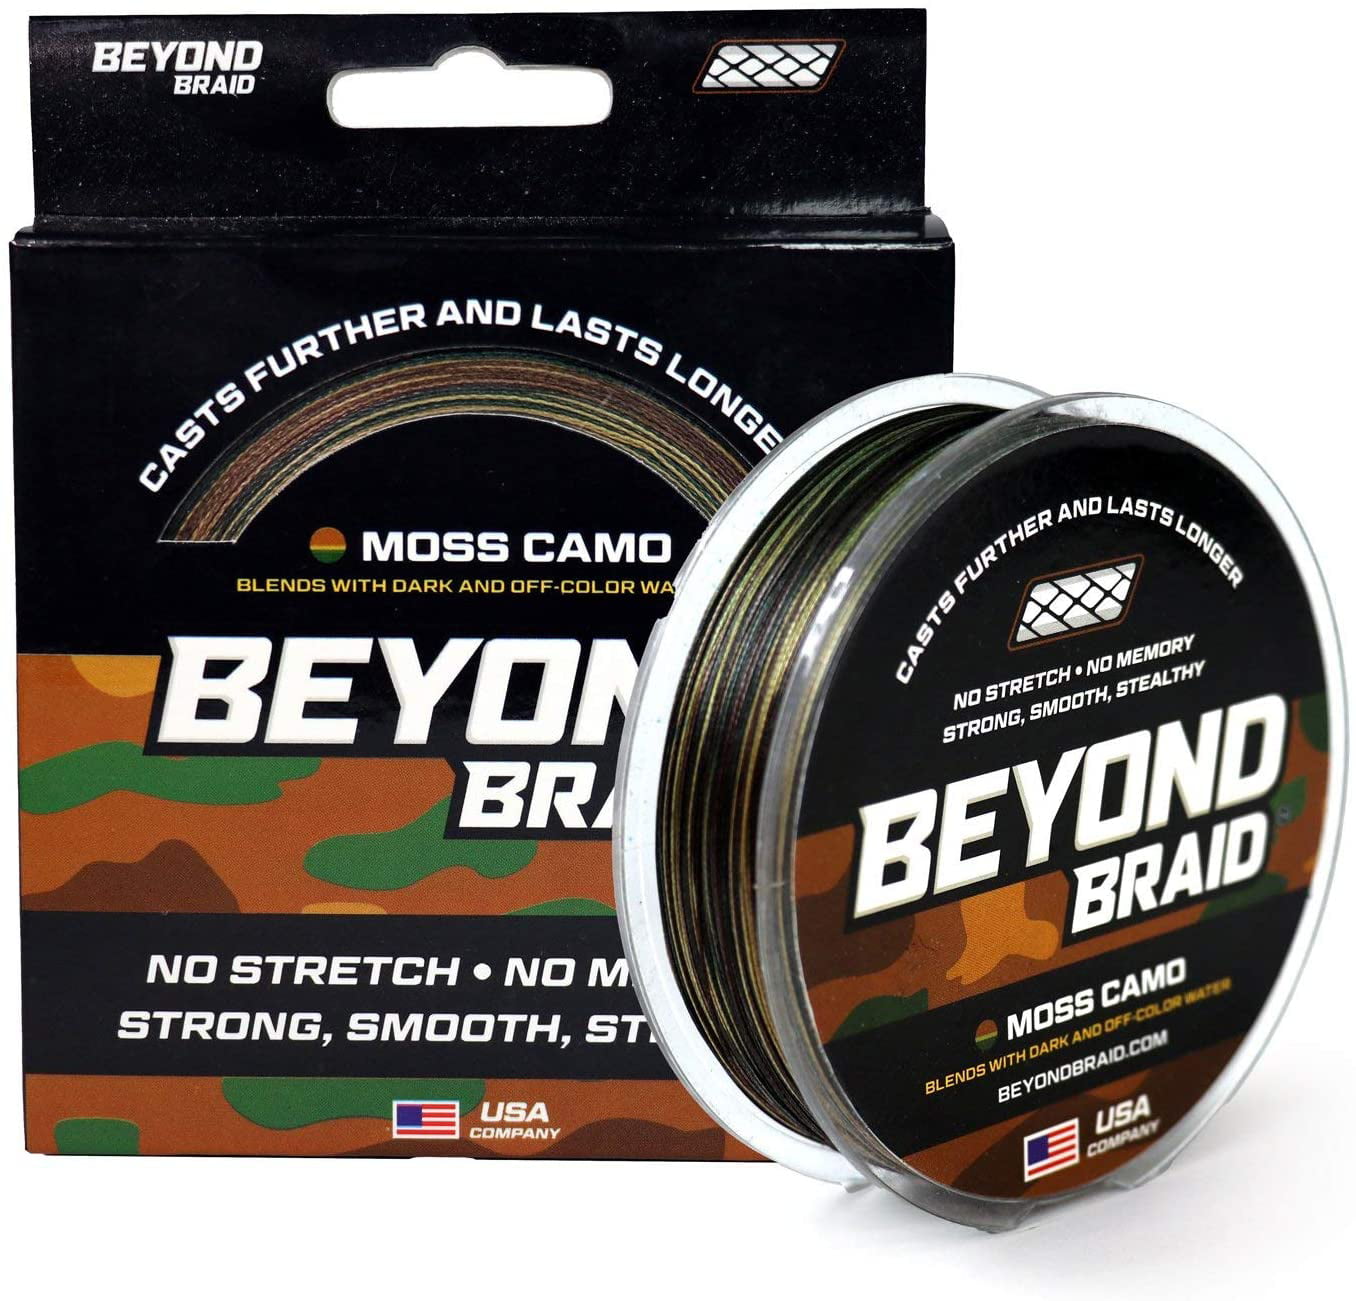 Beyond Braid - No cooler color of fishing line on the market! 🌆🔥